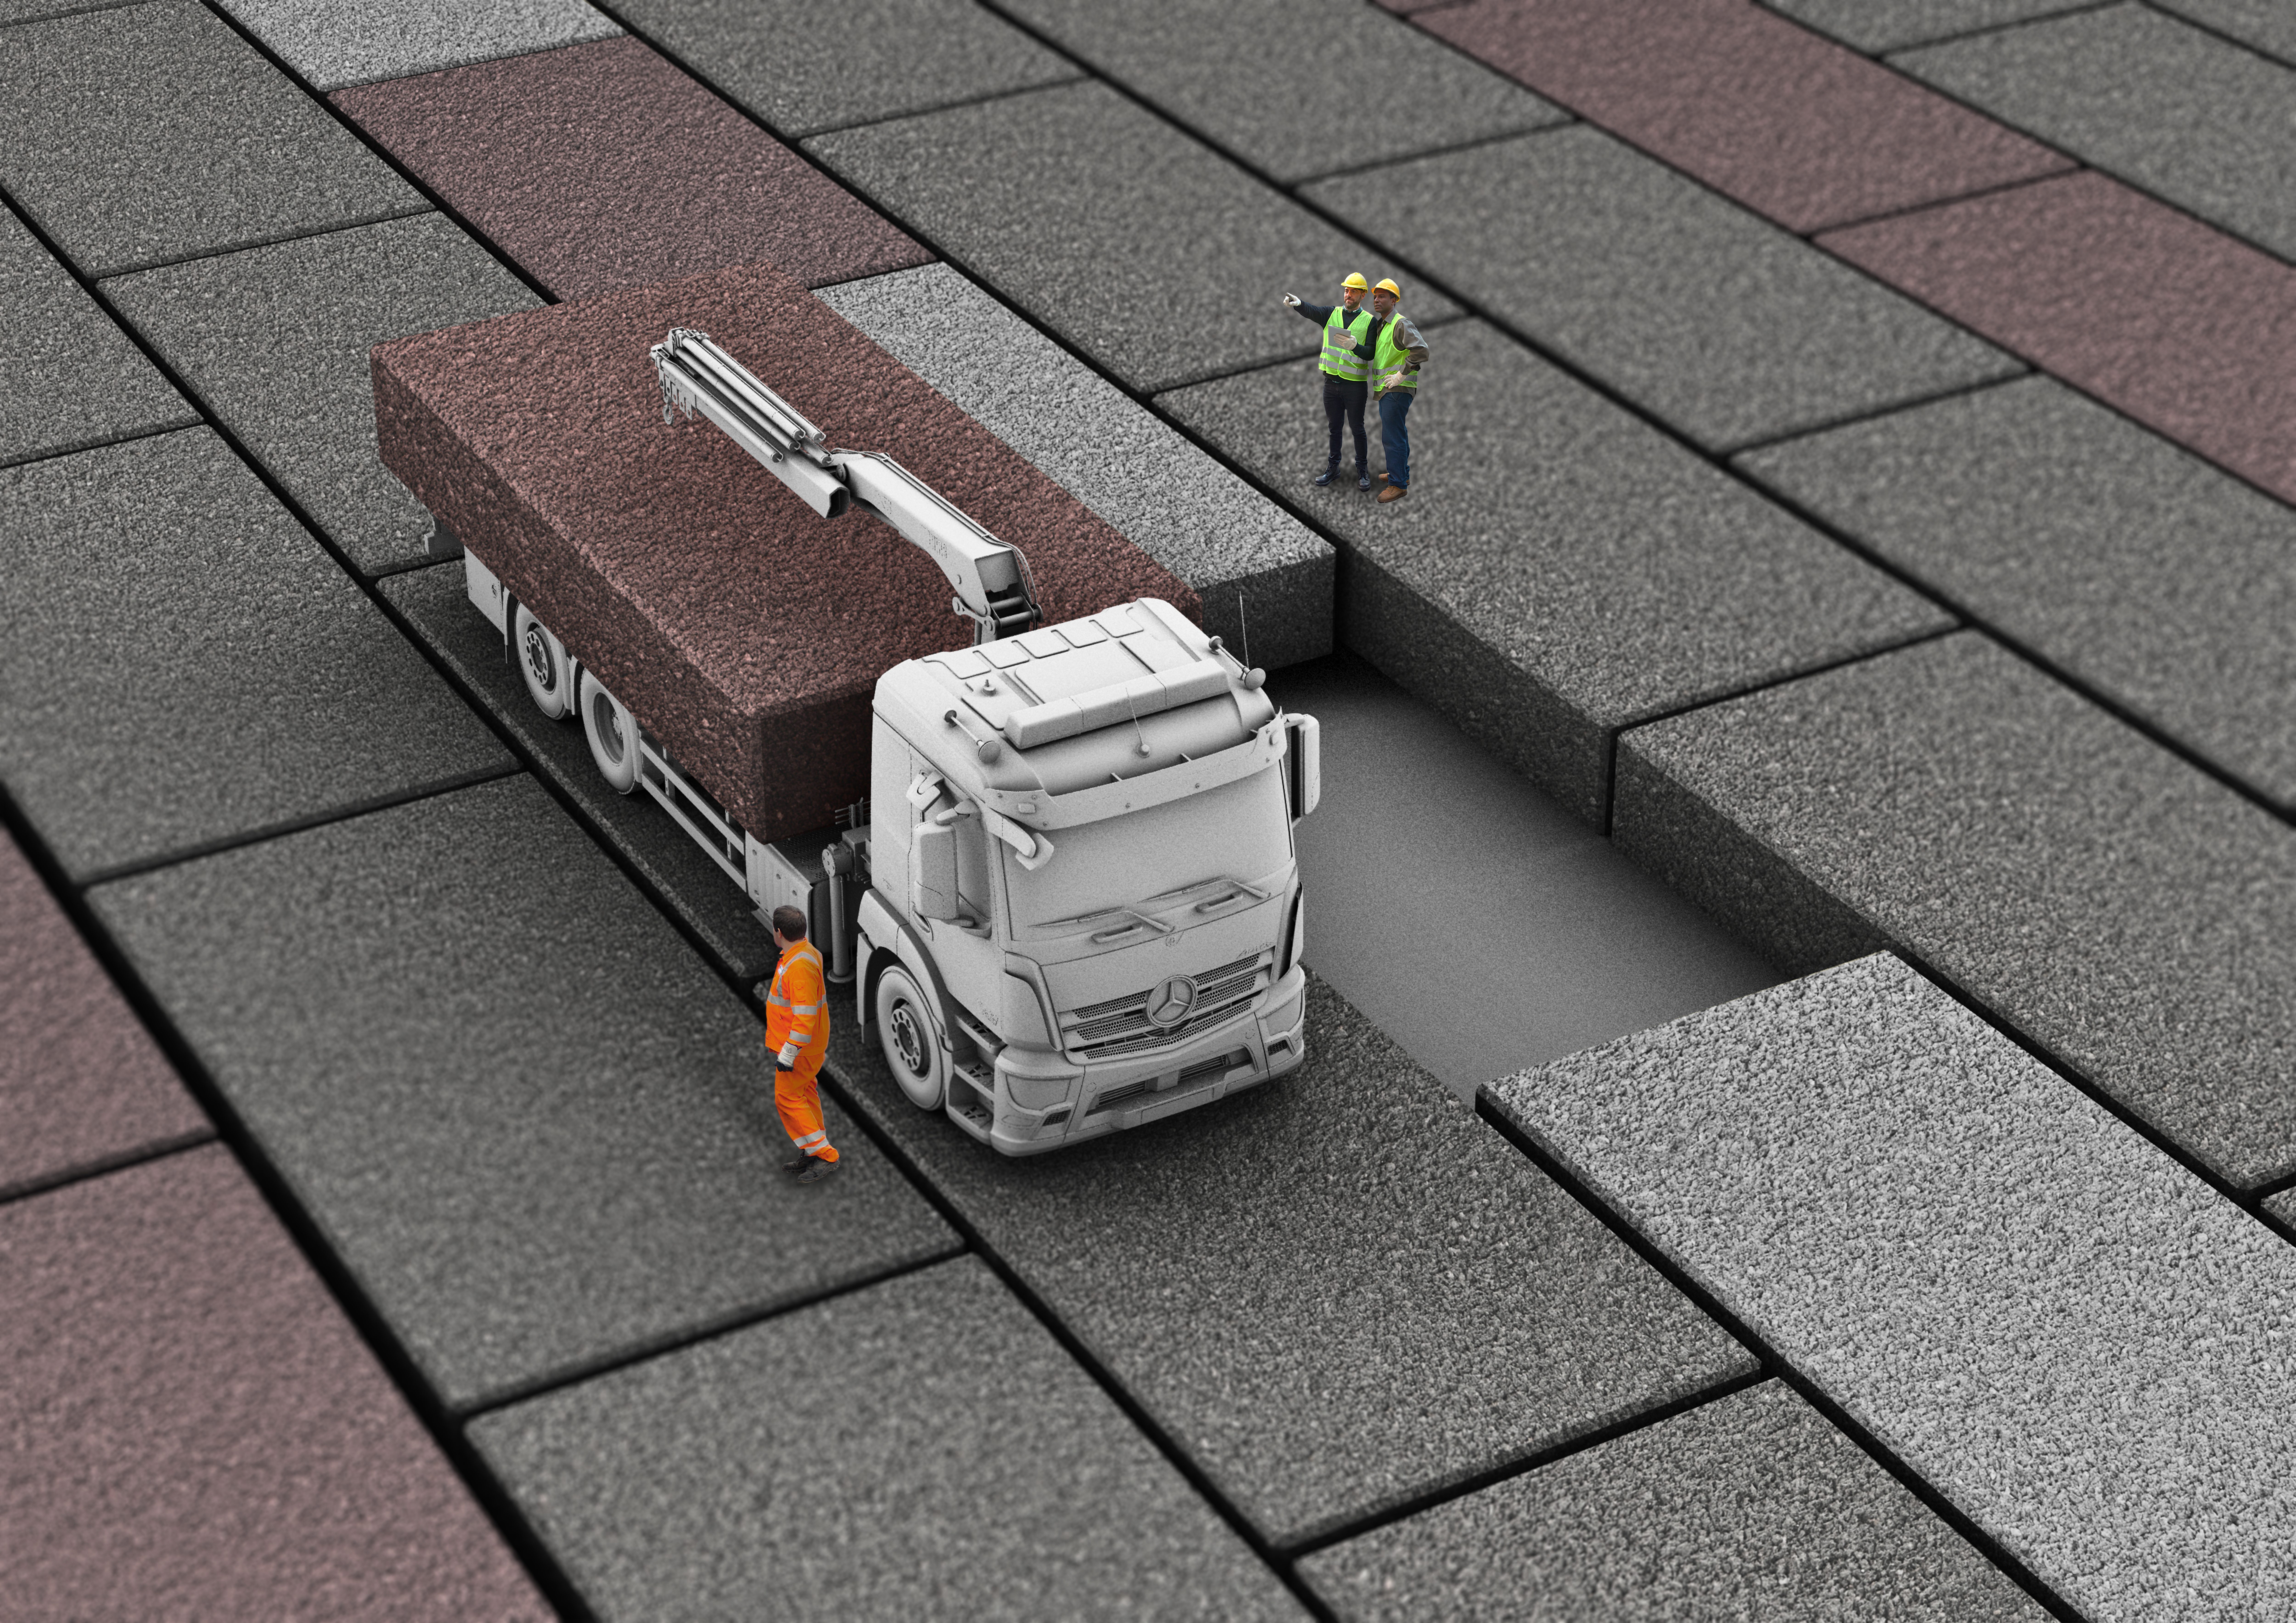 Modal paving being delivered by a truck